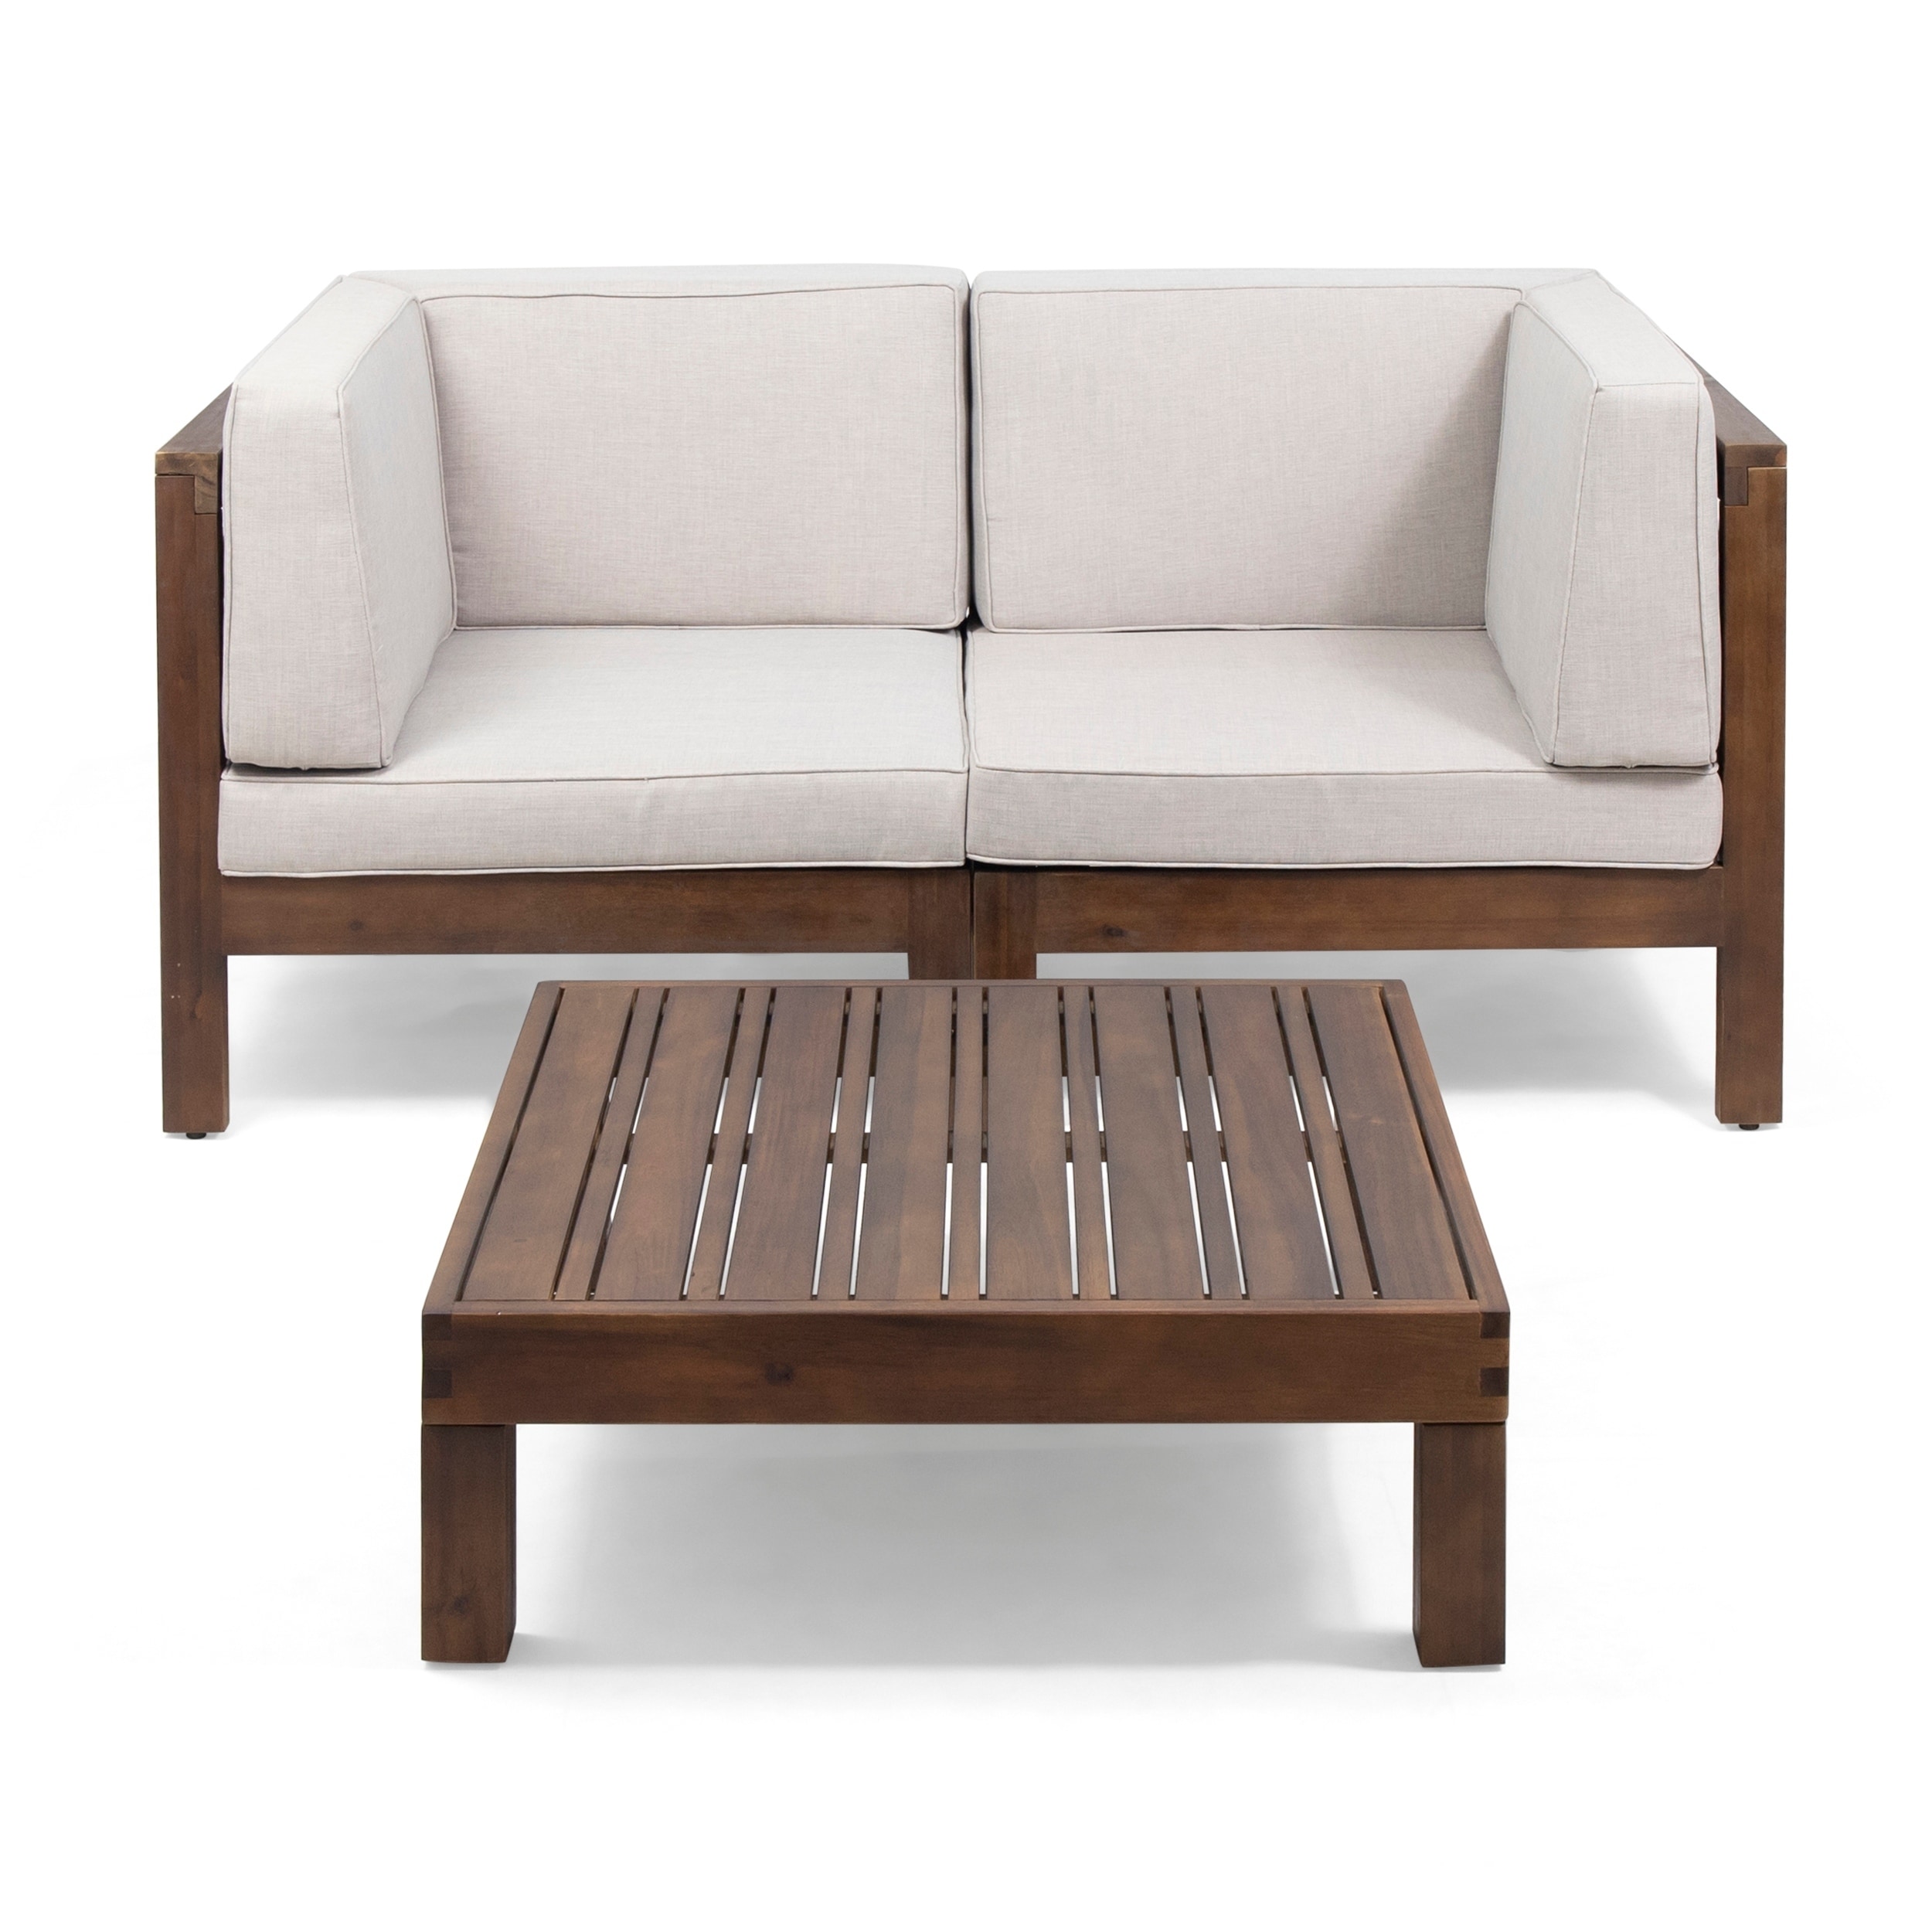 Oana Outdoor 2-seater Acacia Wood Sectional Loveseat Set With Coffee Table By Christopher Knight Home